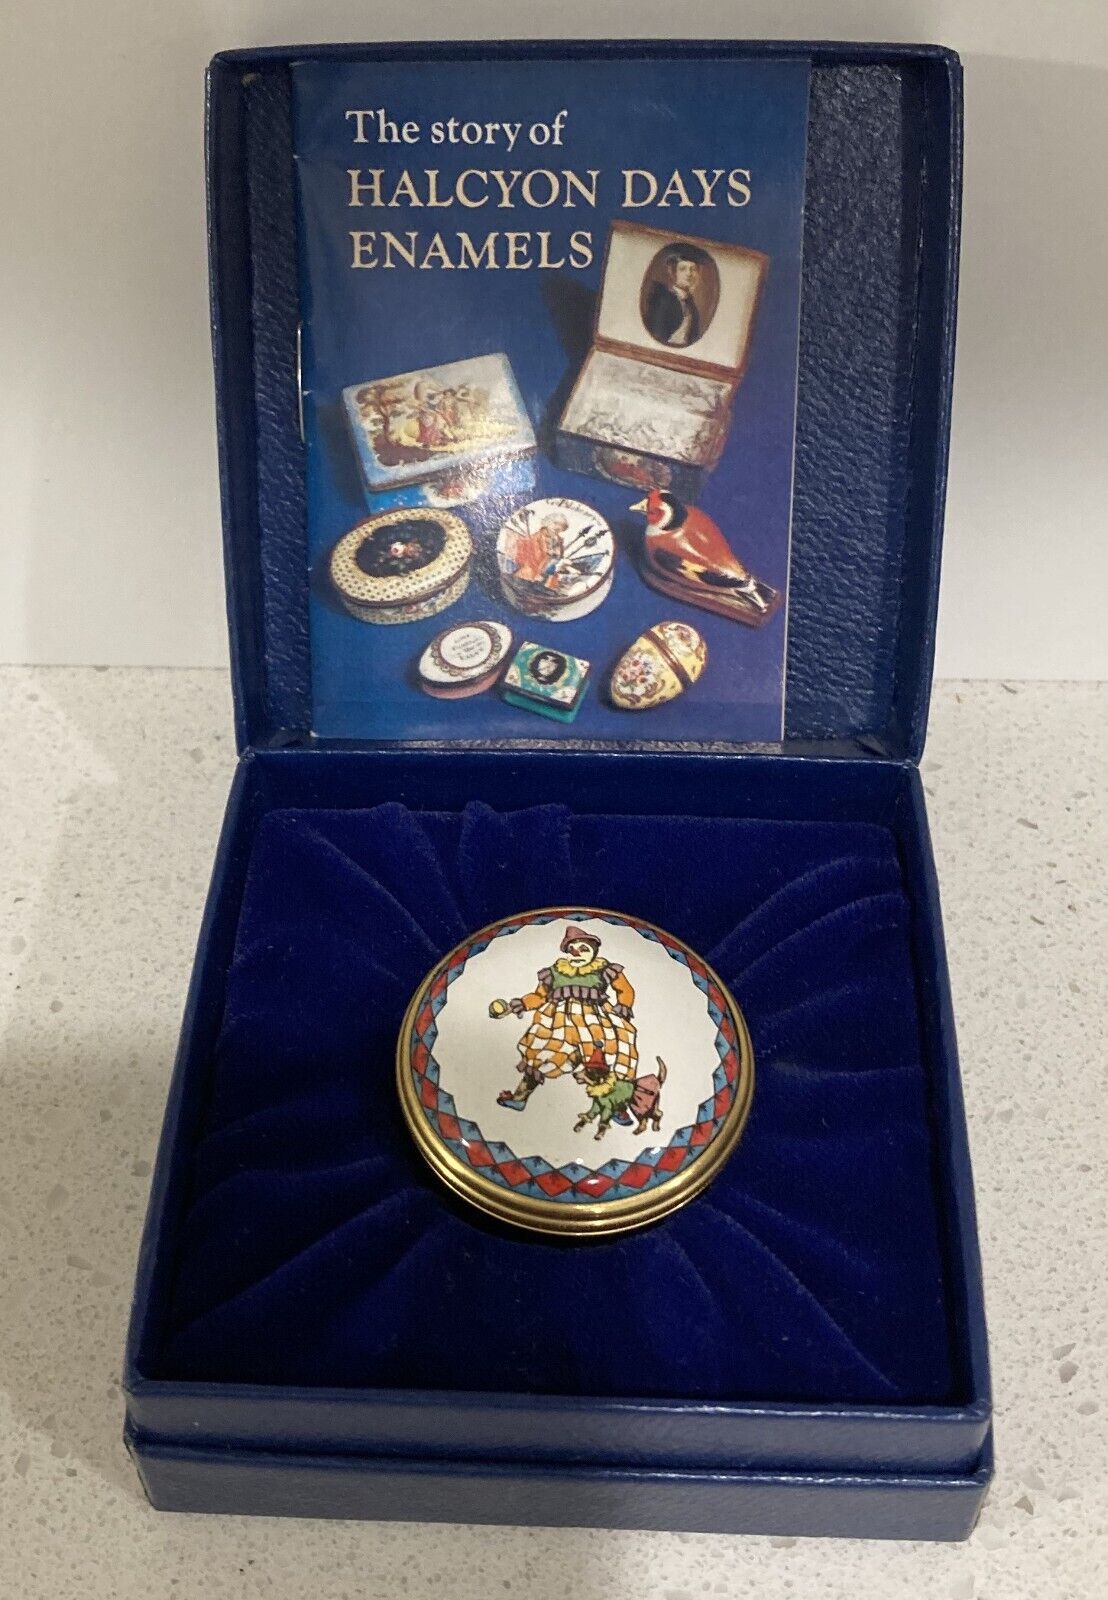 HALCYON DAYS ENAMEL BOX  RARE CLOWN WITH PERFORMING DOG IN ORIGINAL  BOX